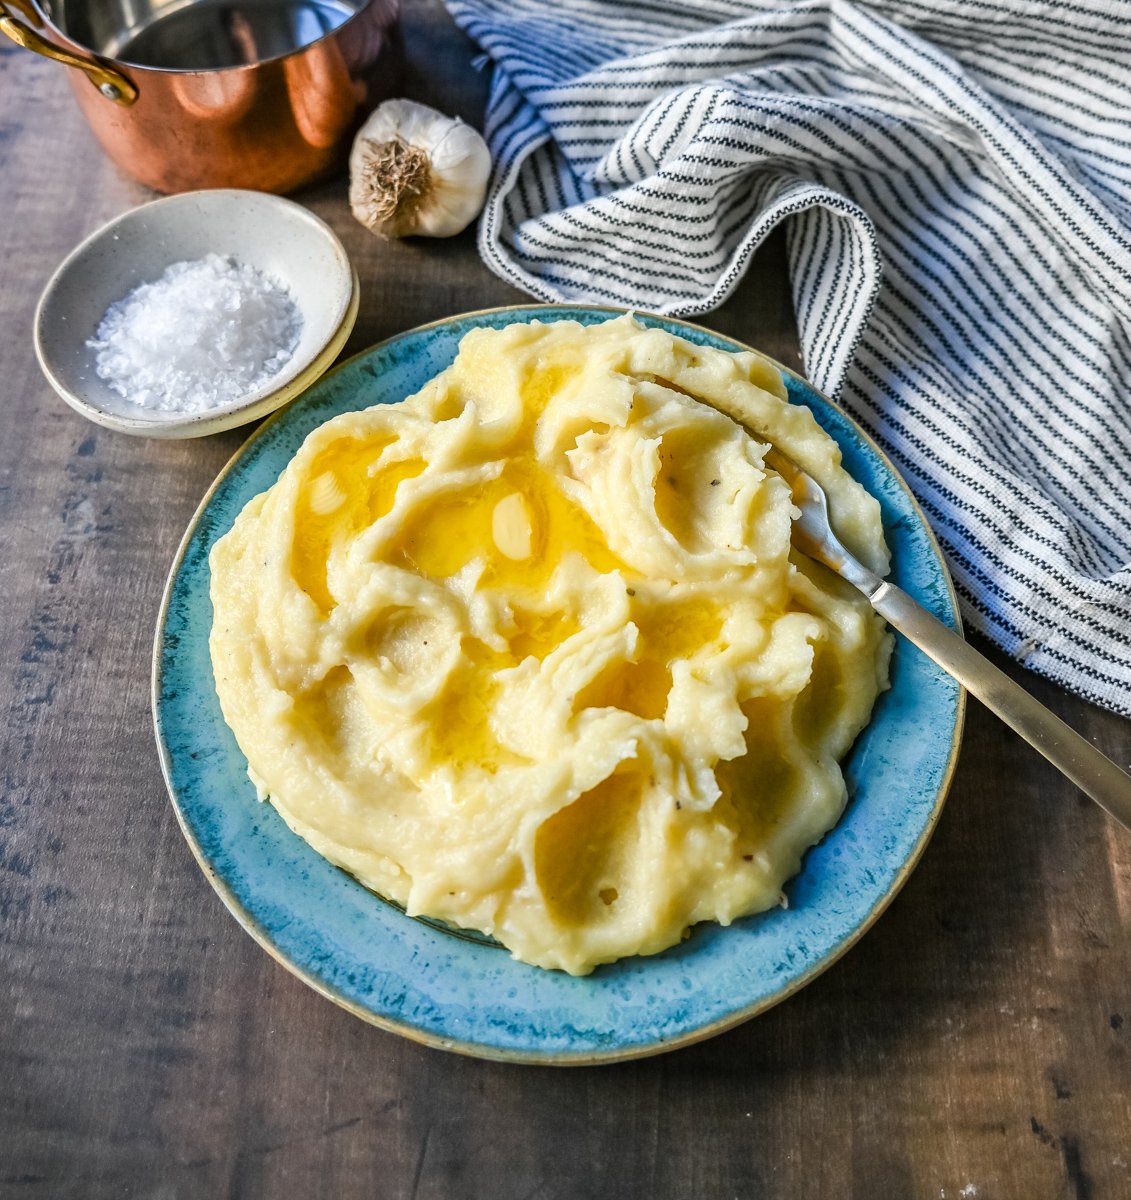 Parmesan Roasted Garlic Mashed Potatoes. Creamy mashed potatoes with roasted garlic and freshly grated parmesan cheese. These flavorful roasted garlic mashed potatoes are such a delicious side dish.